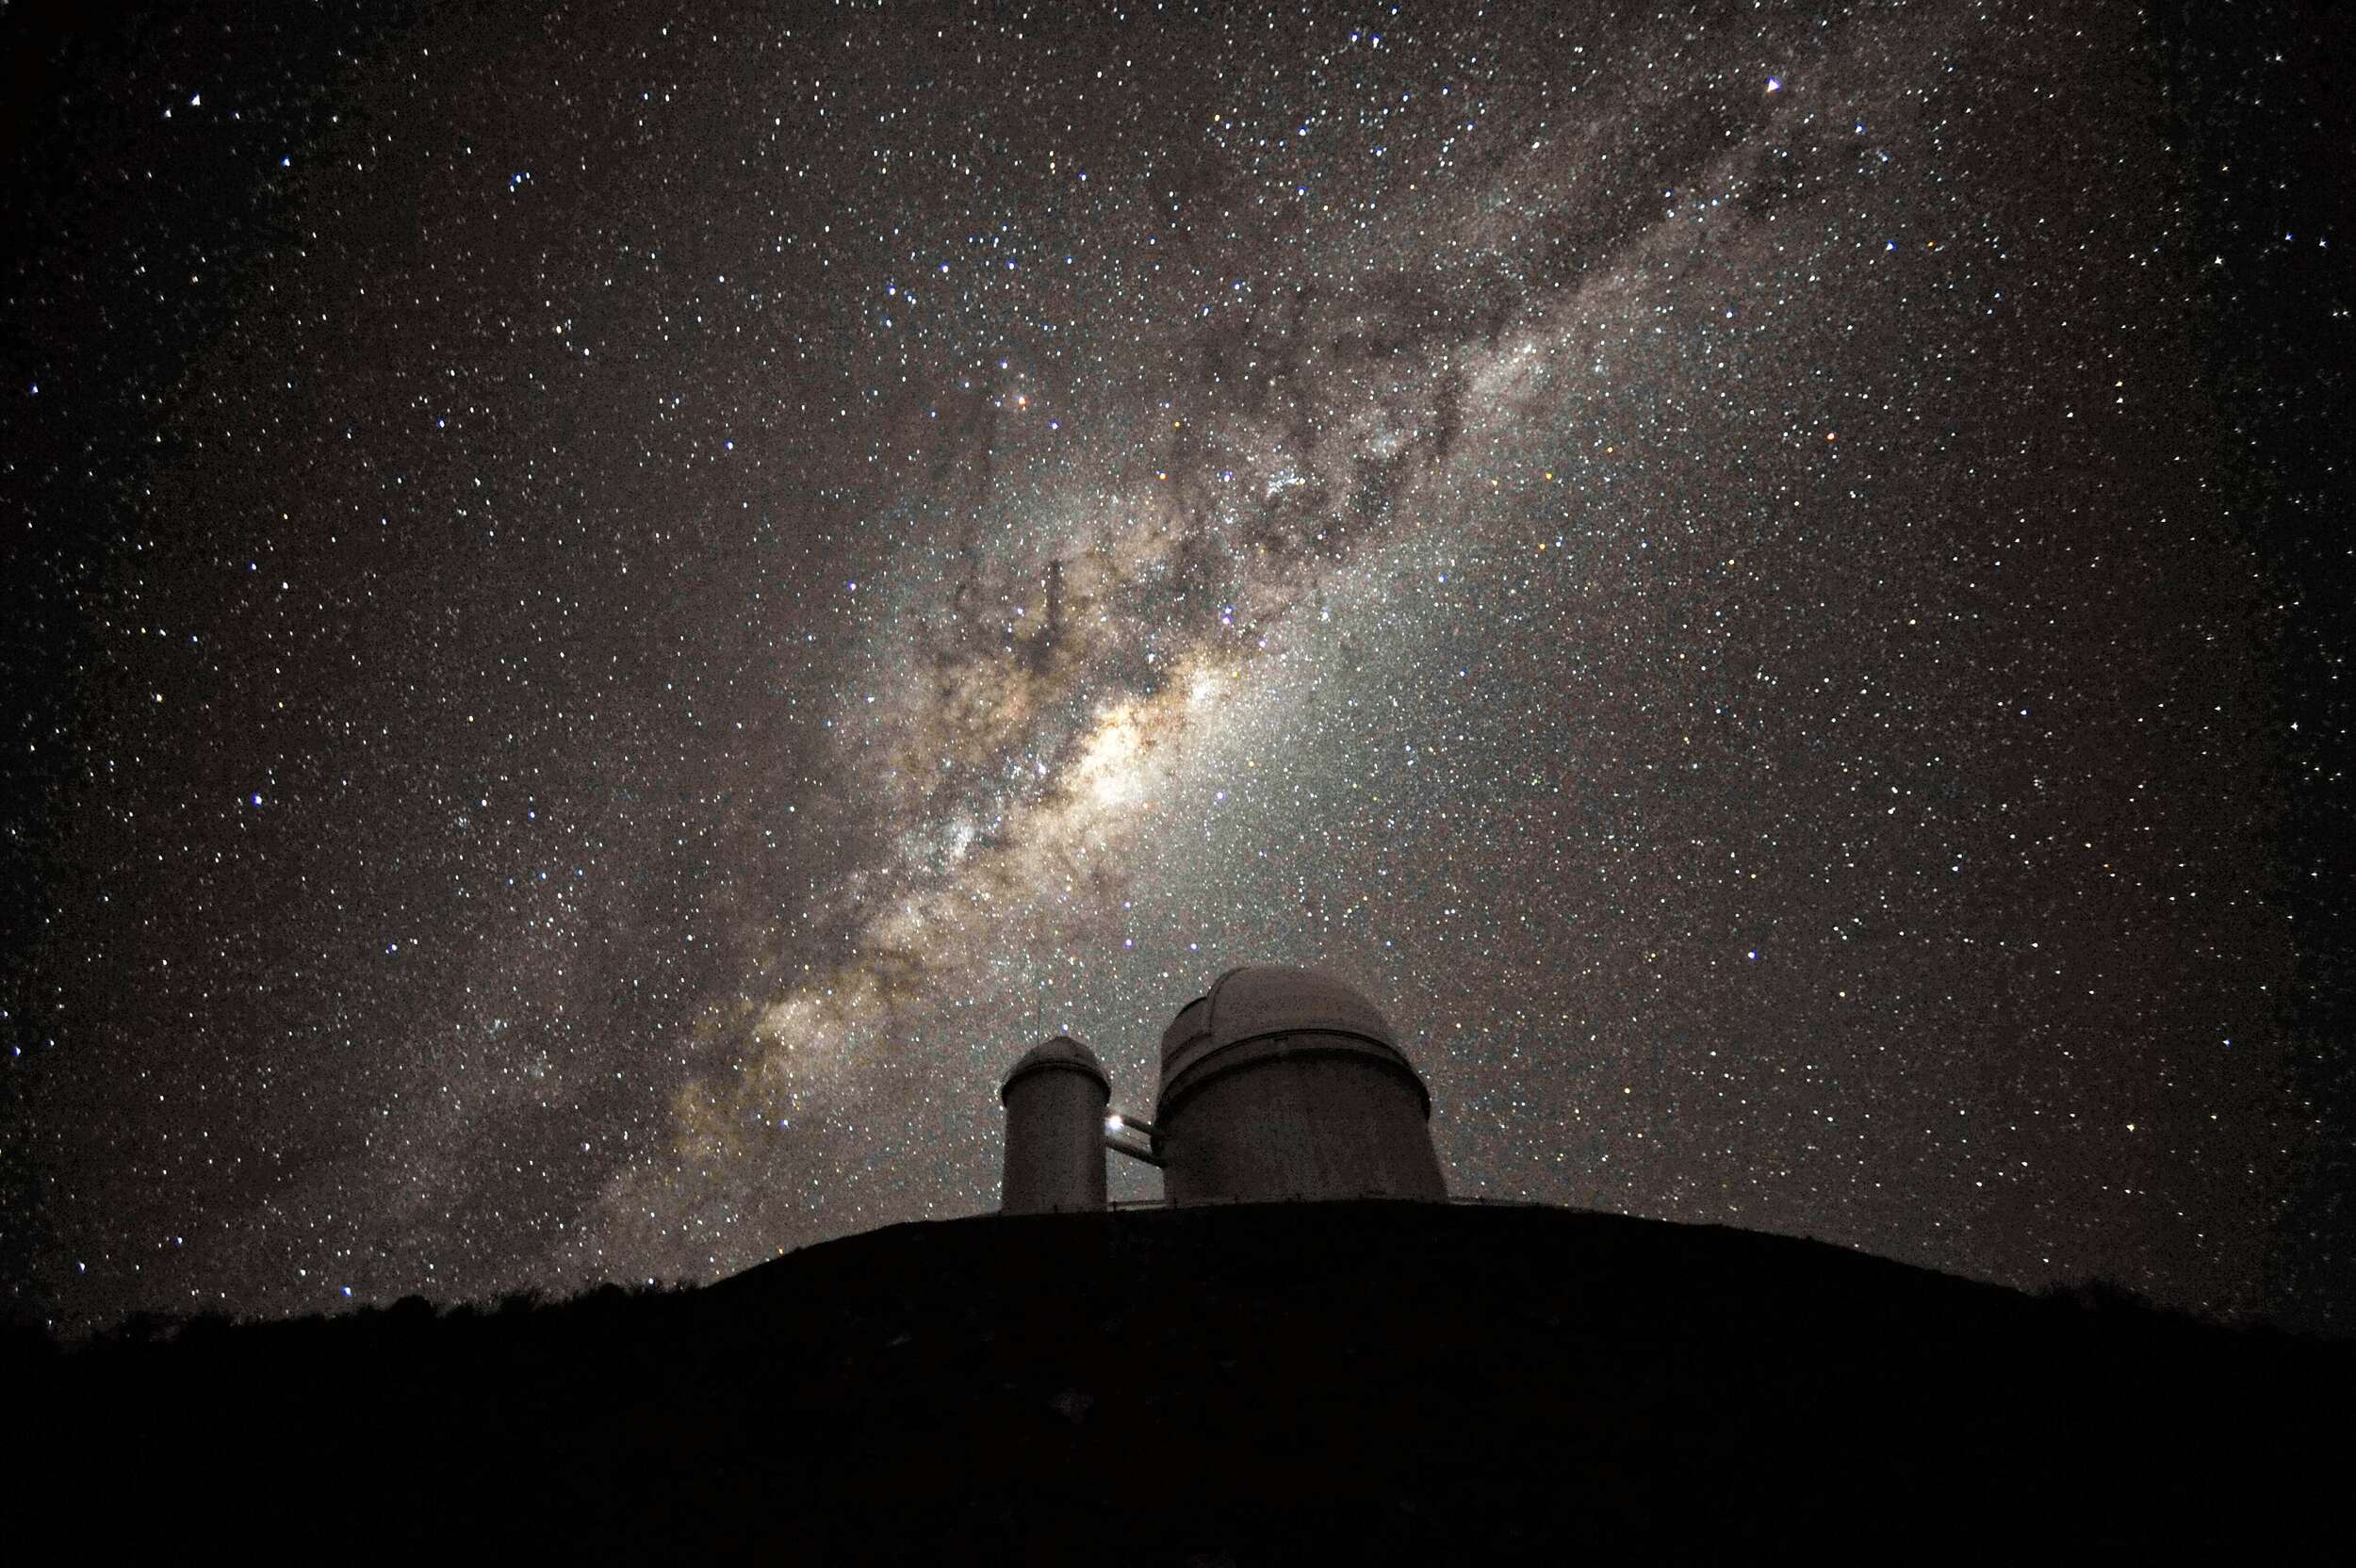 The milky way in the dark sky above a watch tower